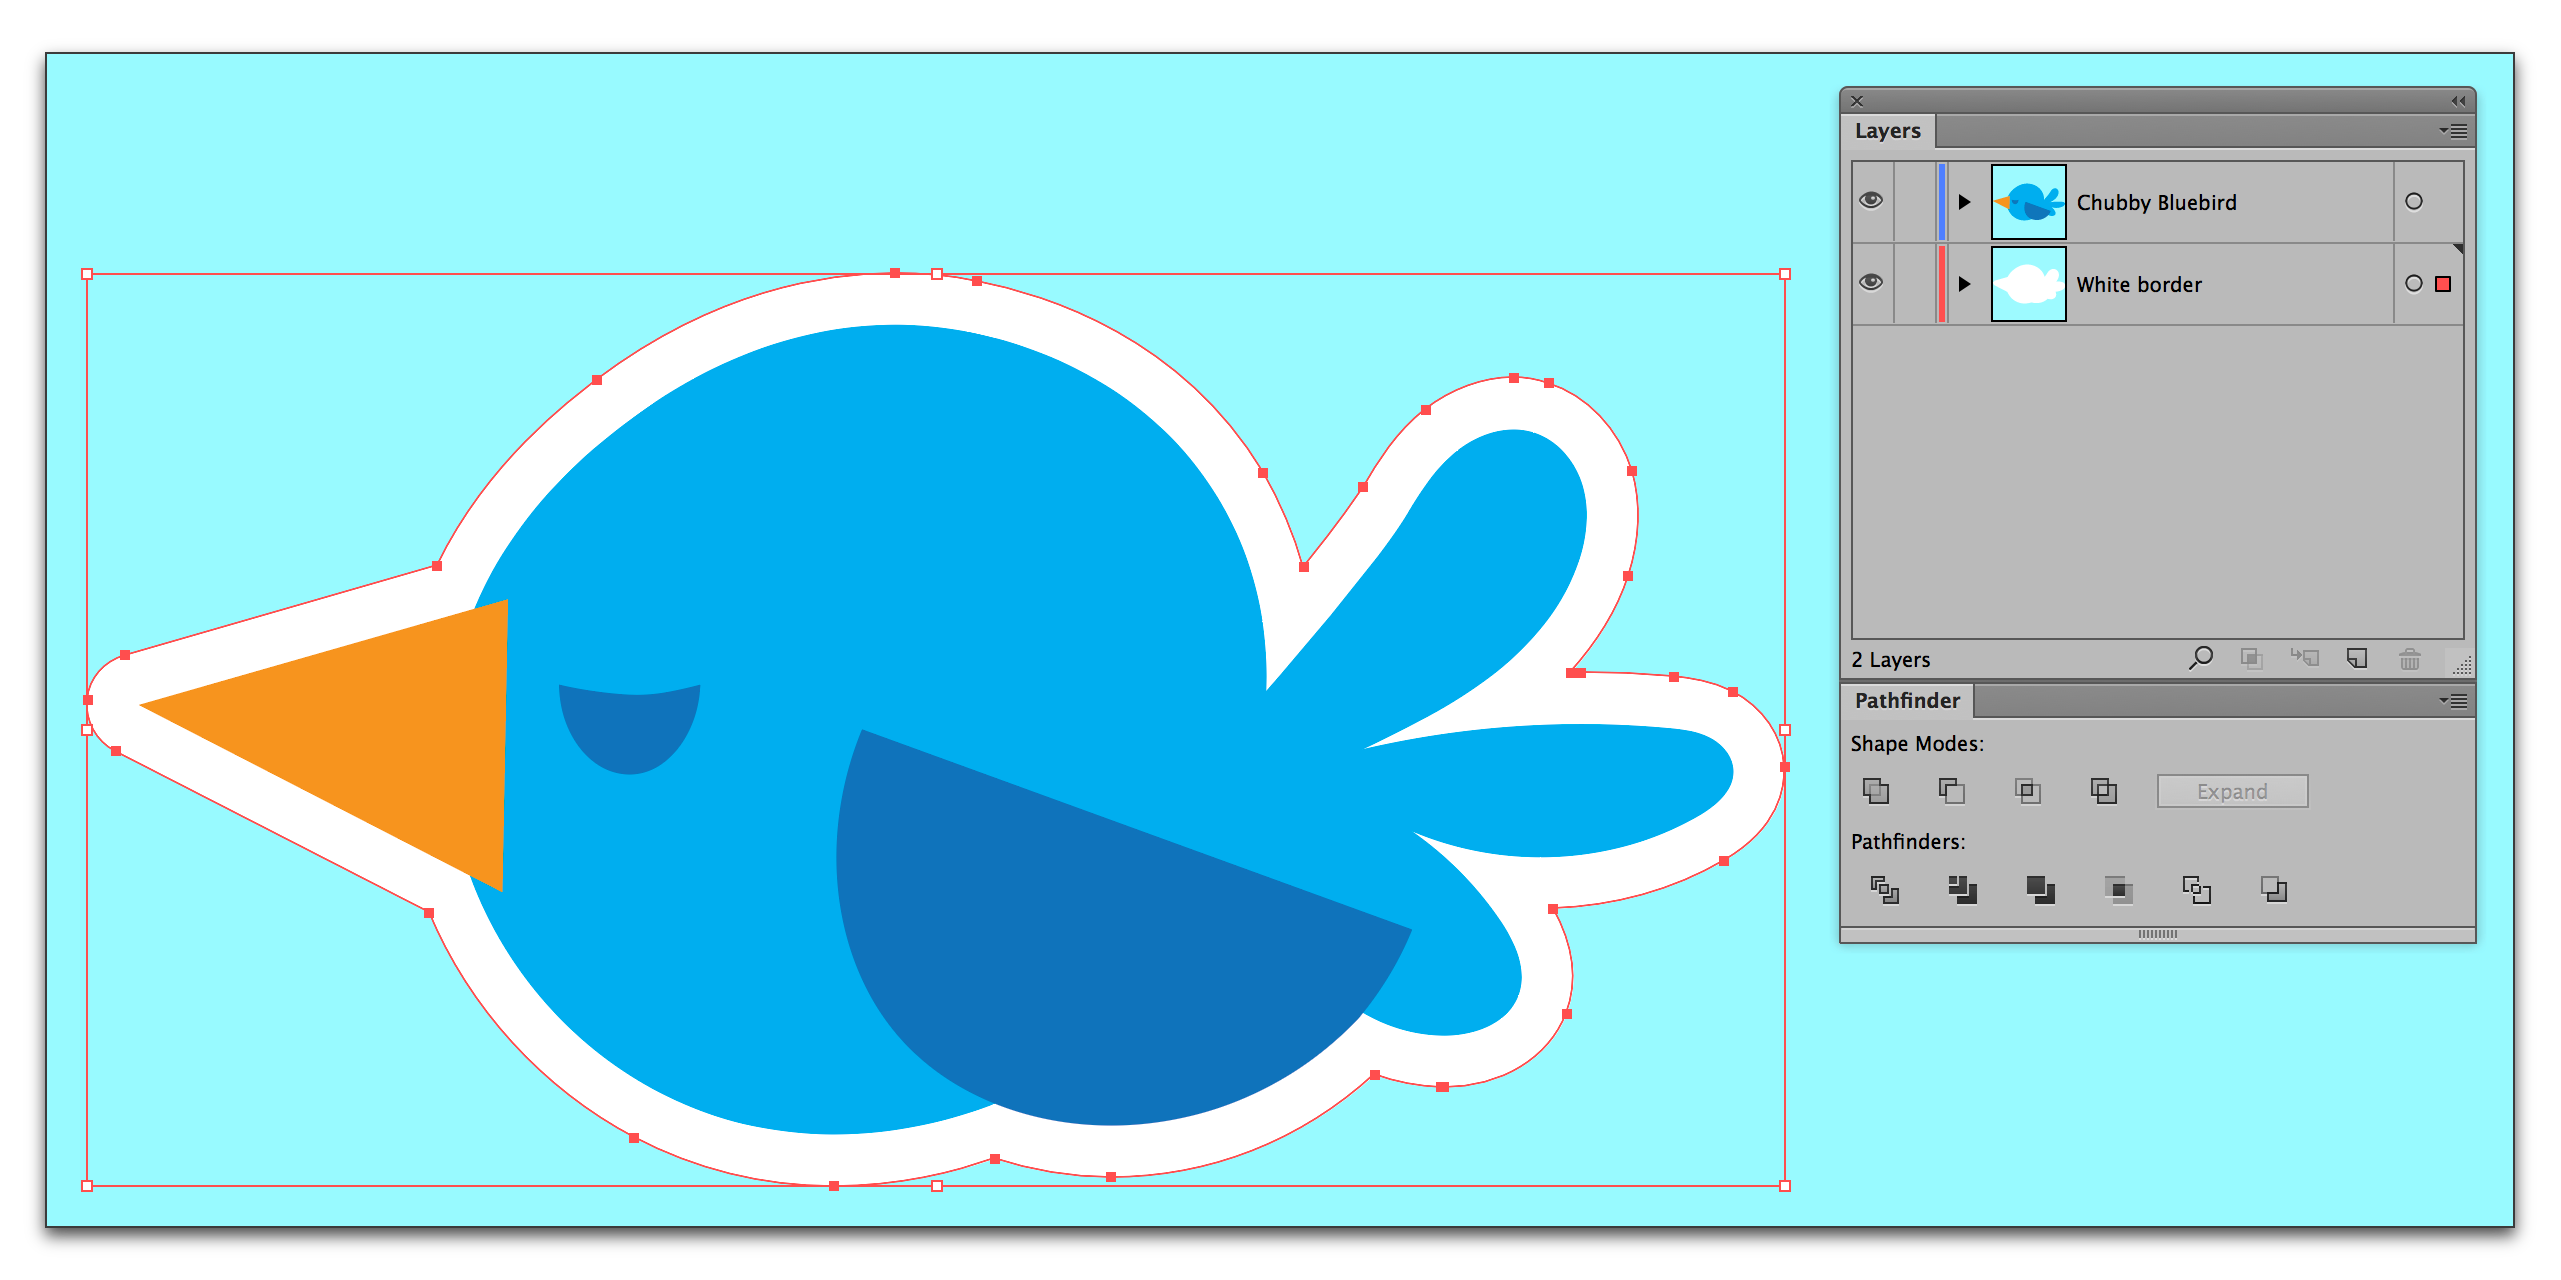 Adobe Illustrator CC 2015: Adding a white border for stickers and window clings